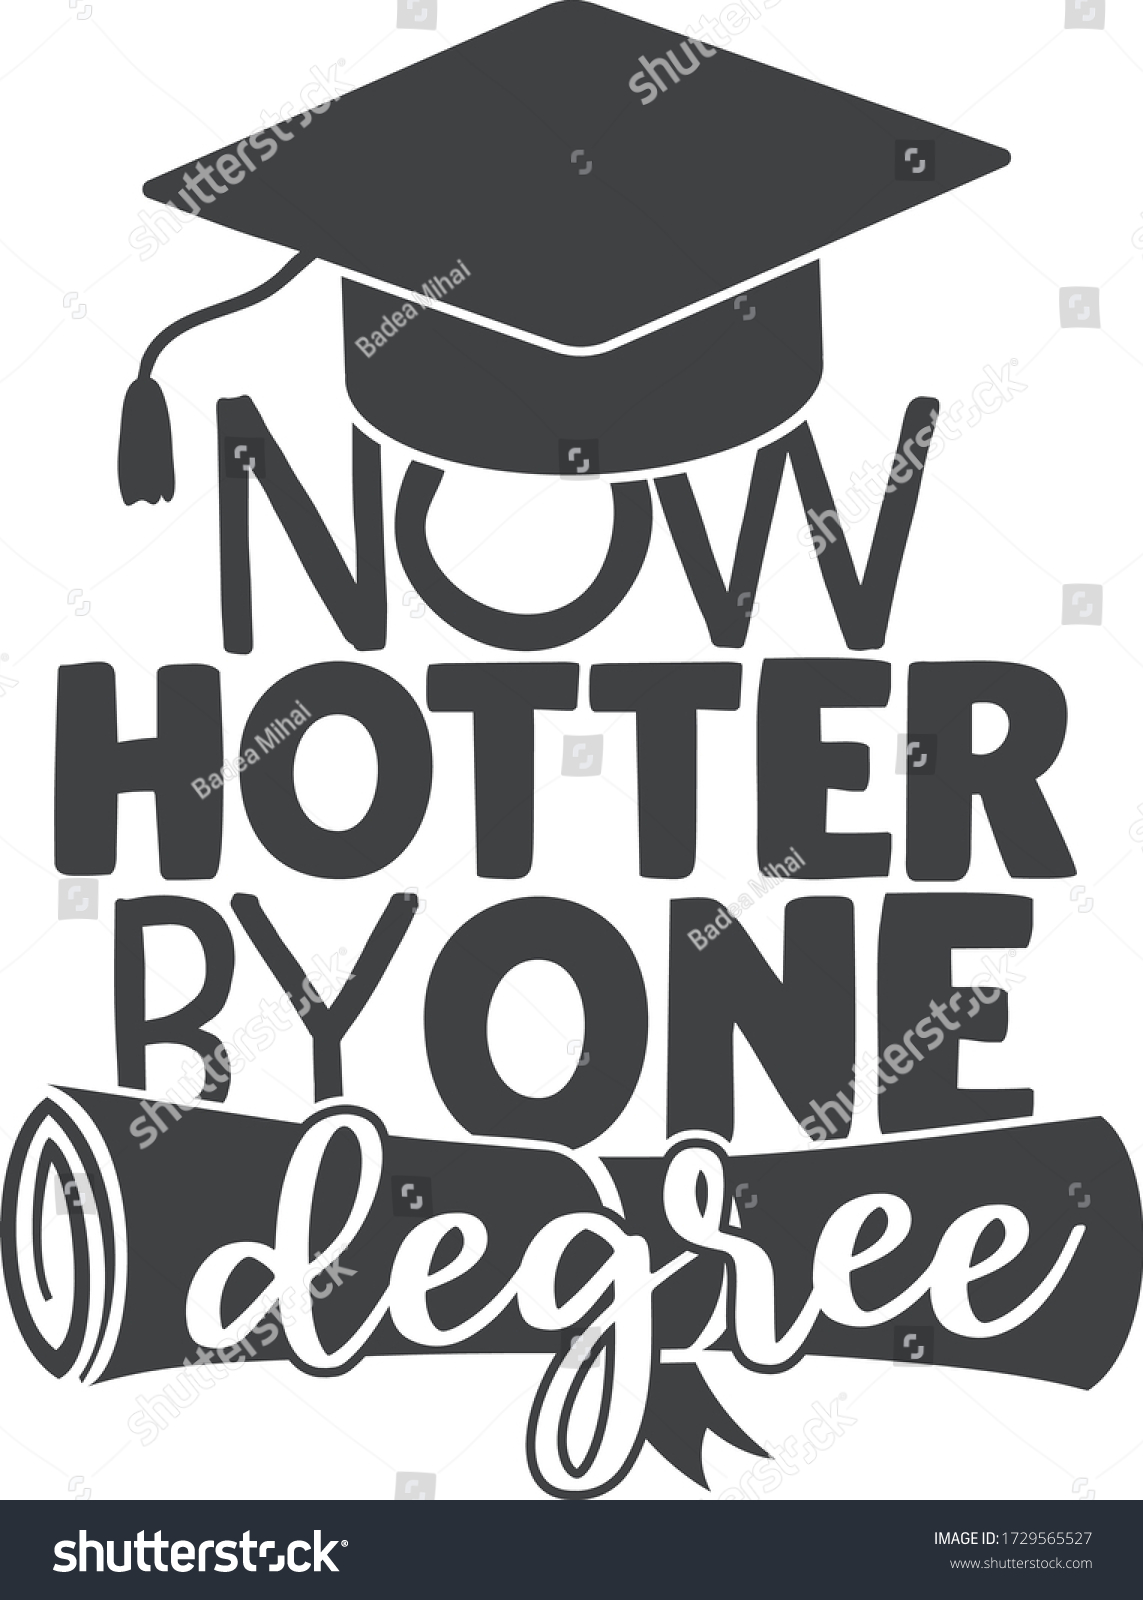 Download Now Hotter By One Degree Graduation Stock Vector Royalty Free 1729565527